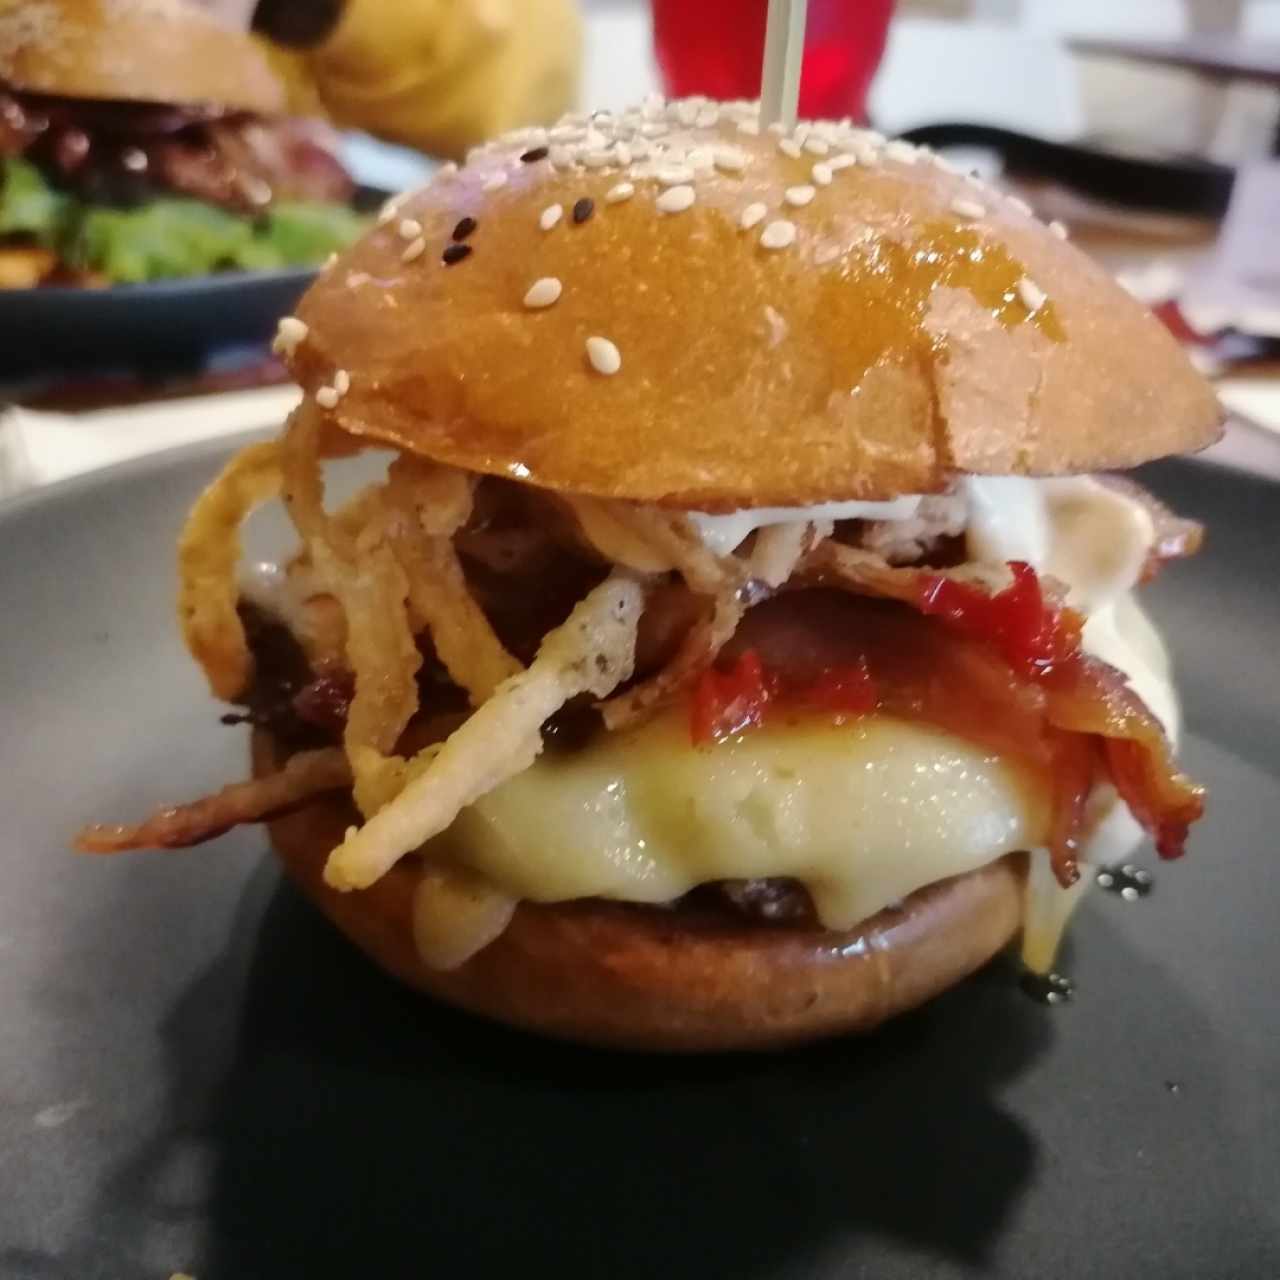 Chef's Special Burger